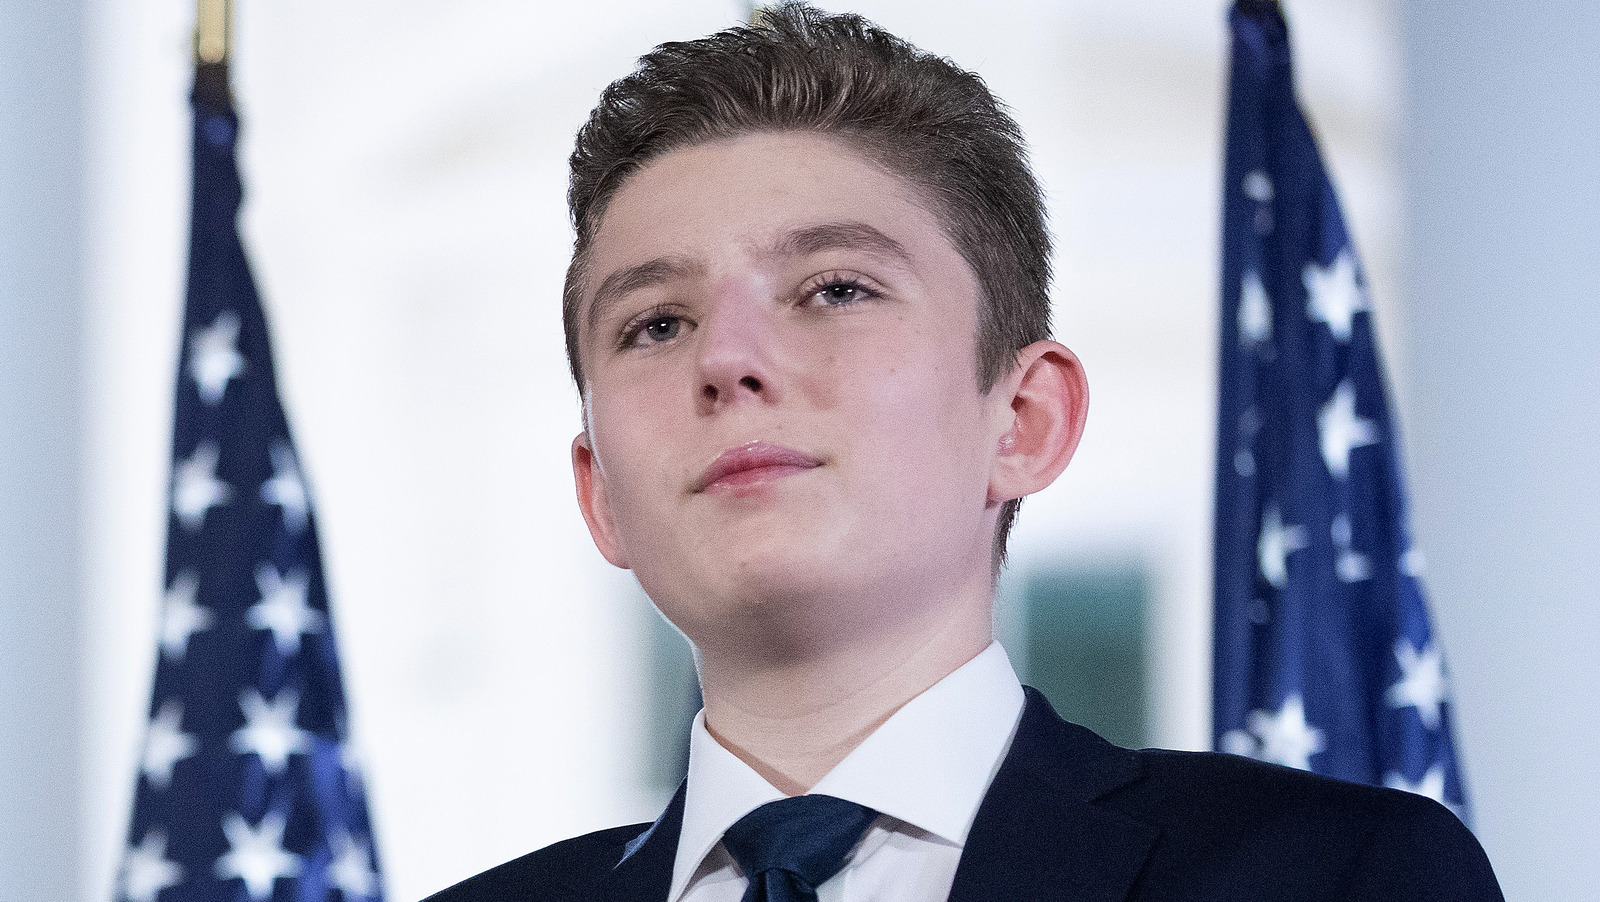 PR Expert Predicts What's Next For Barron Trump In 2024